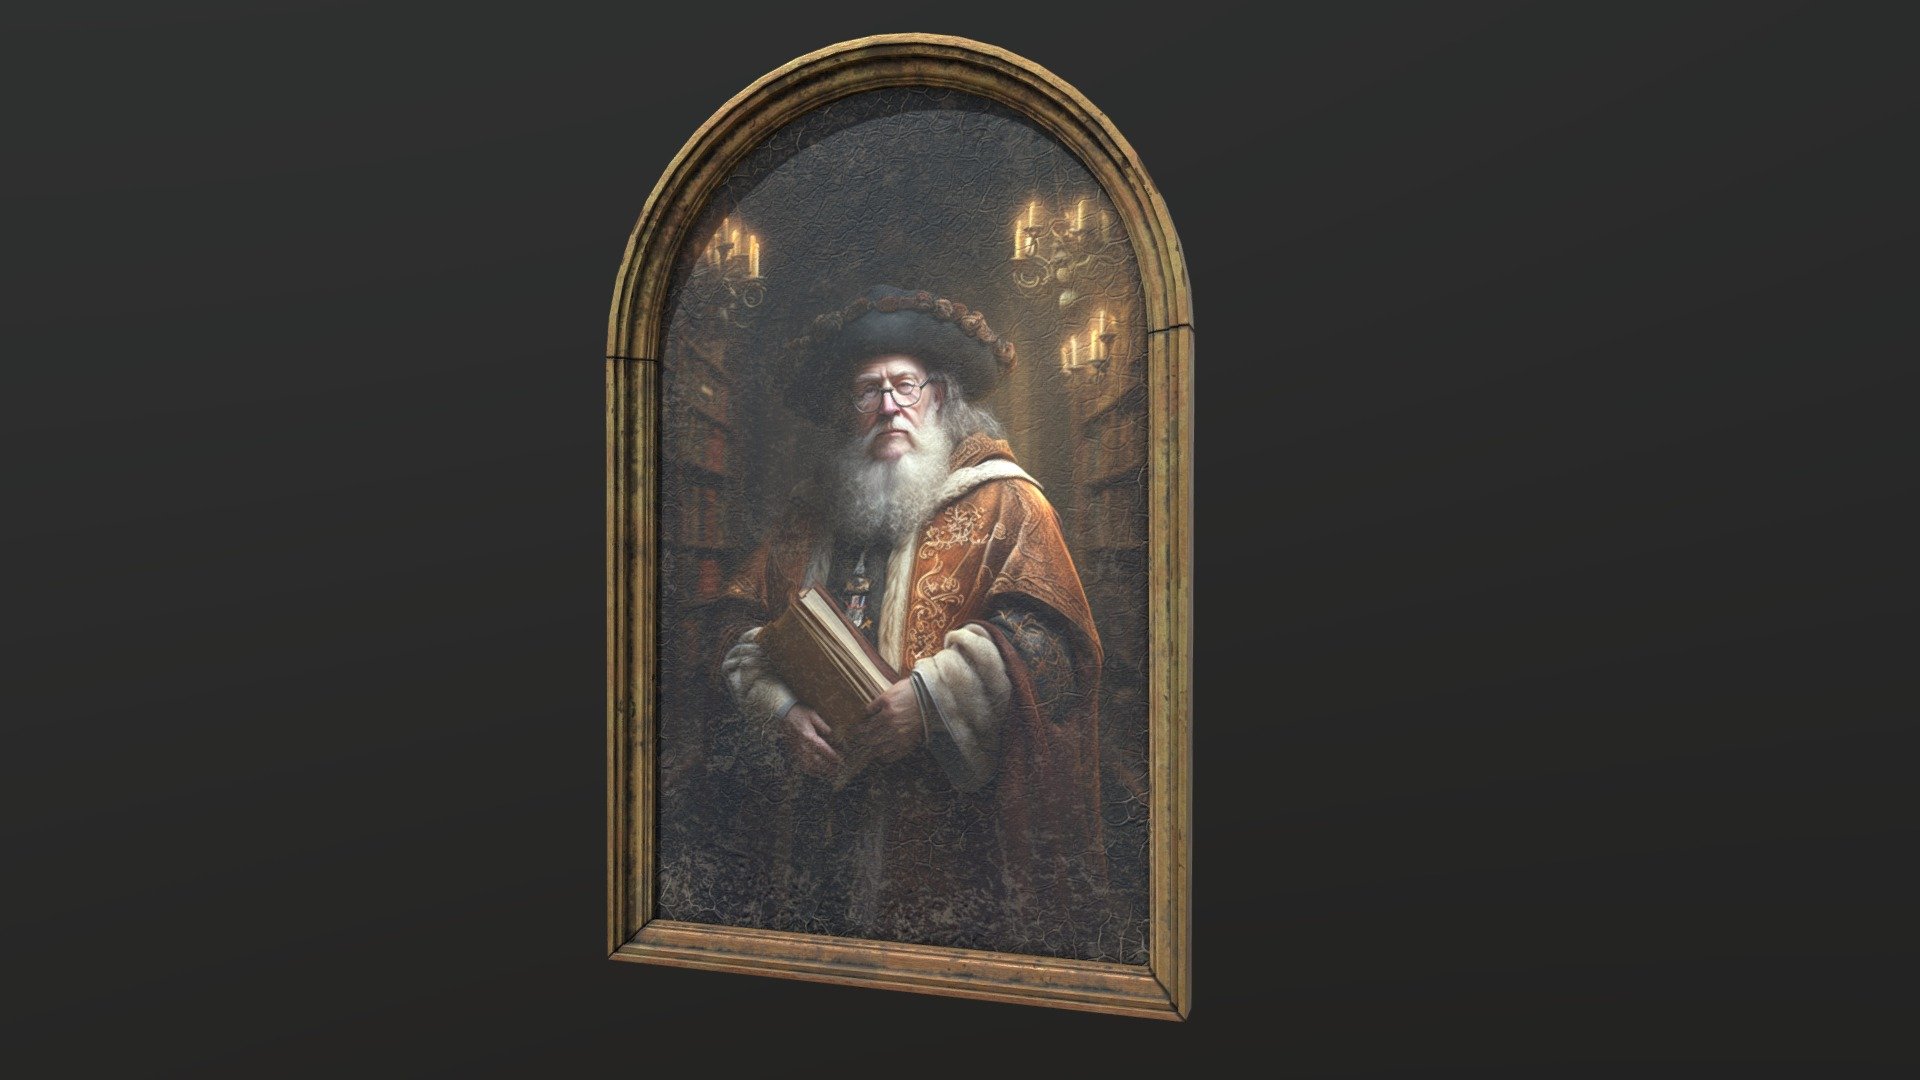 An old oil painting portrait of an old wise wizard in a library.

4K maps: Base Color, Normal (DirectX and OpenGL), Roughness, Metalnic and Ambient Occlusion.

Formats: .fbx and .obj - Old Portrait Painting of Wizard - Buy Royalty Free 3D model by Anskar 3d model